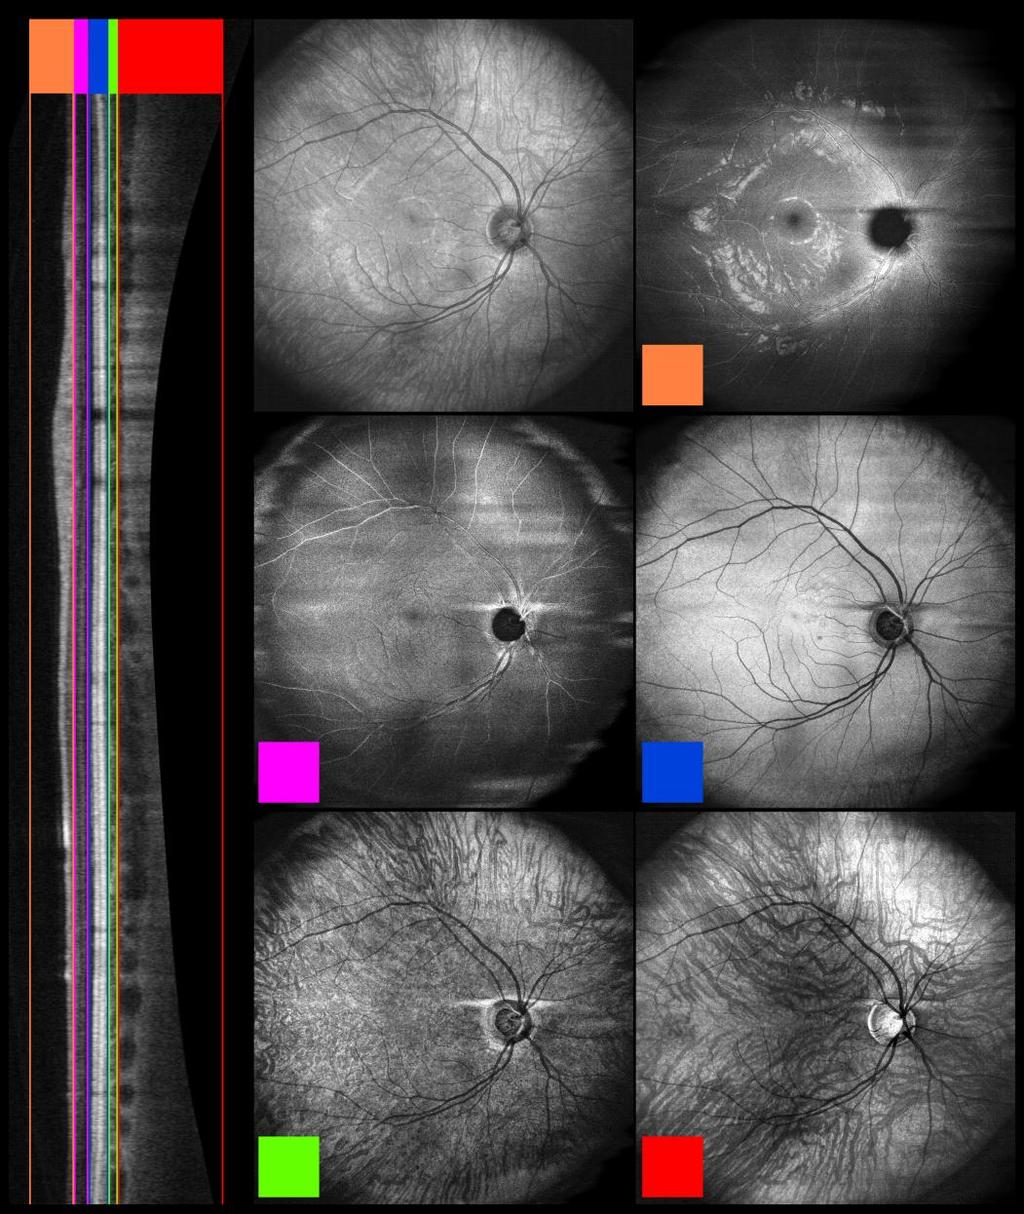 For 12x and 24x B-frame averaging, the combination of both speckle noise reduction and increased signal to noise ratio allows for clear identification of vessels in the sclera, which are not